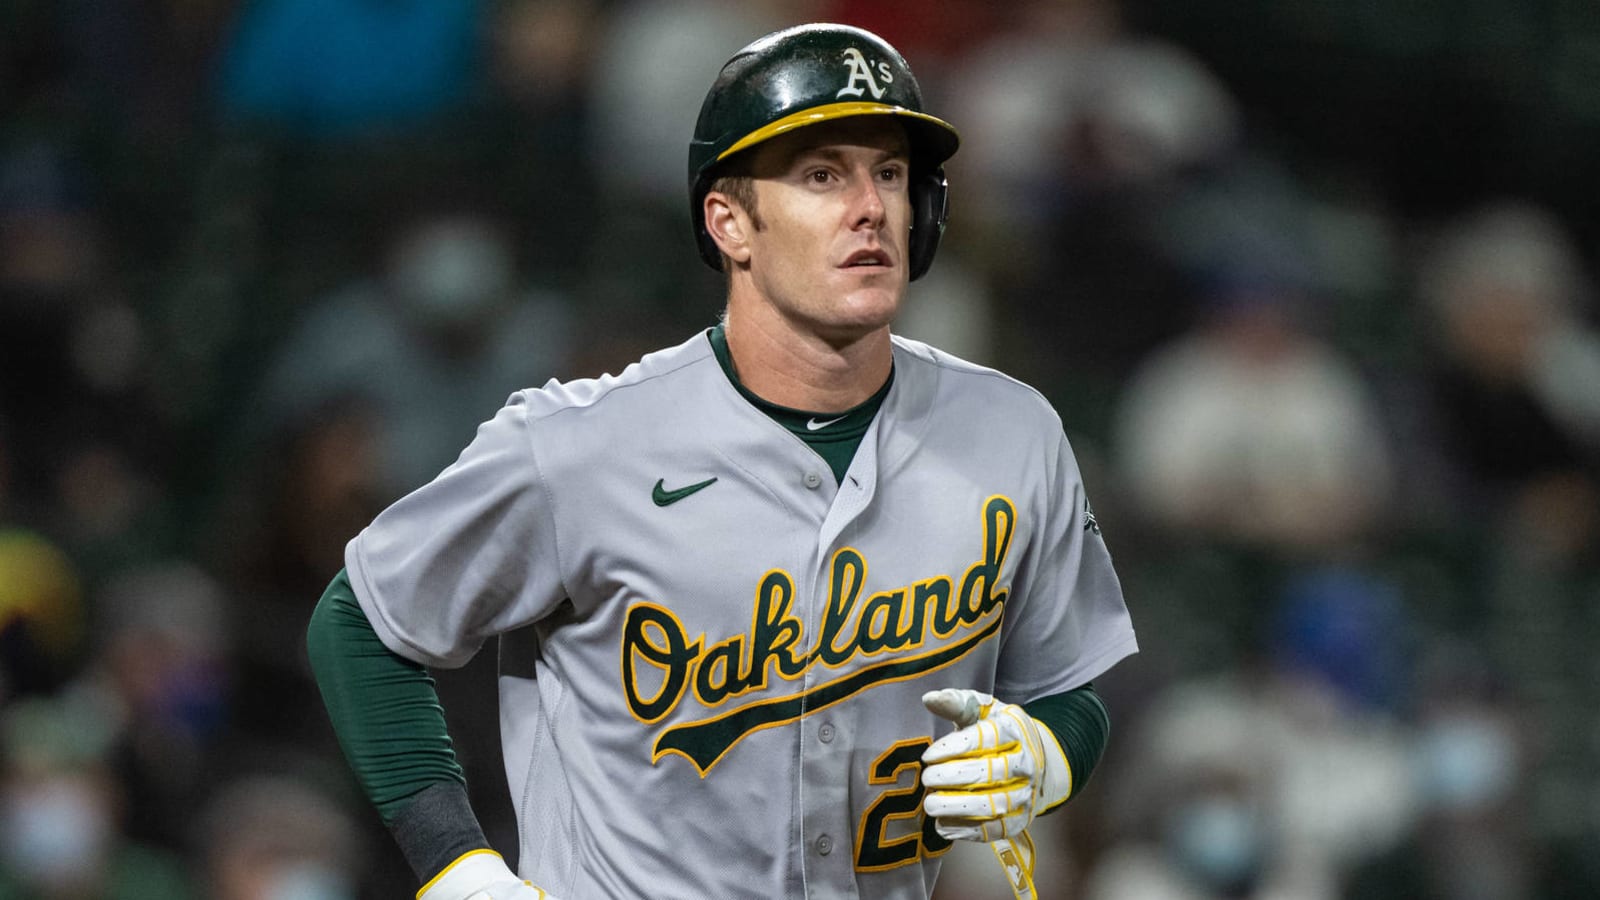 Ex-Athletics outfielder Mark Canha explains why he signed with